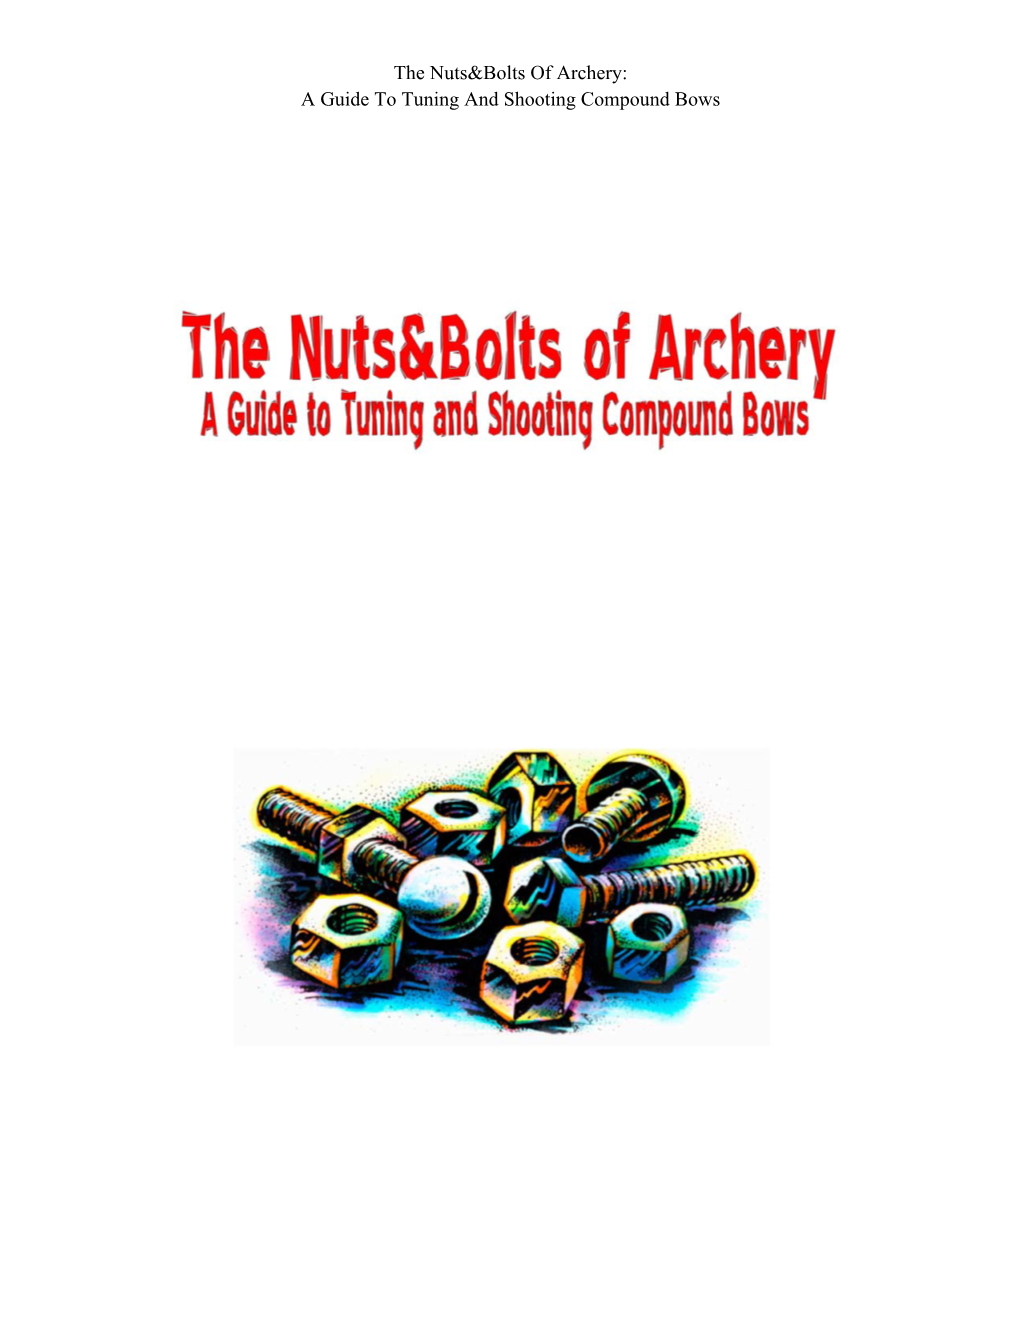 The Nuts&Bolts of Archery: a Guide to Tuning and Shooting